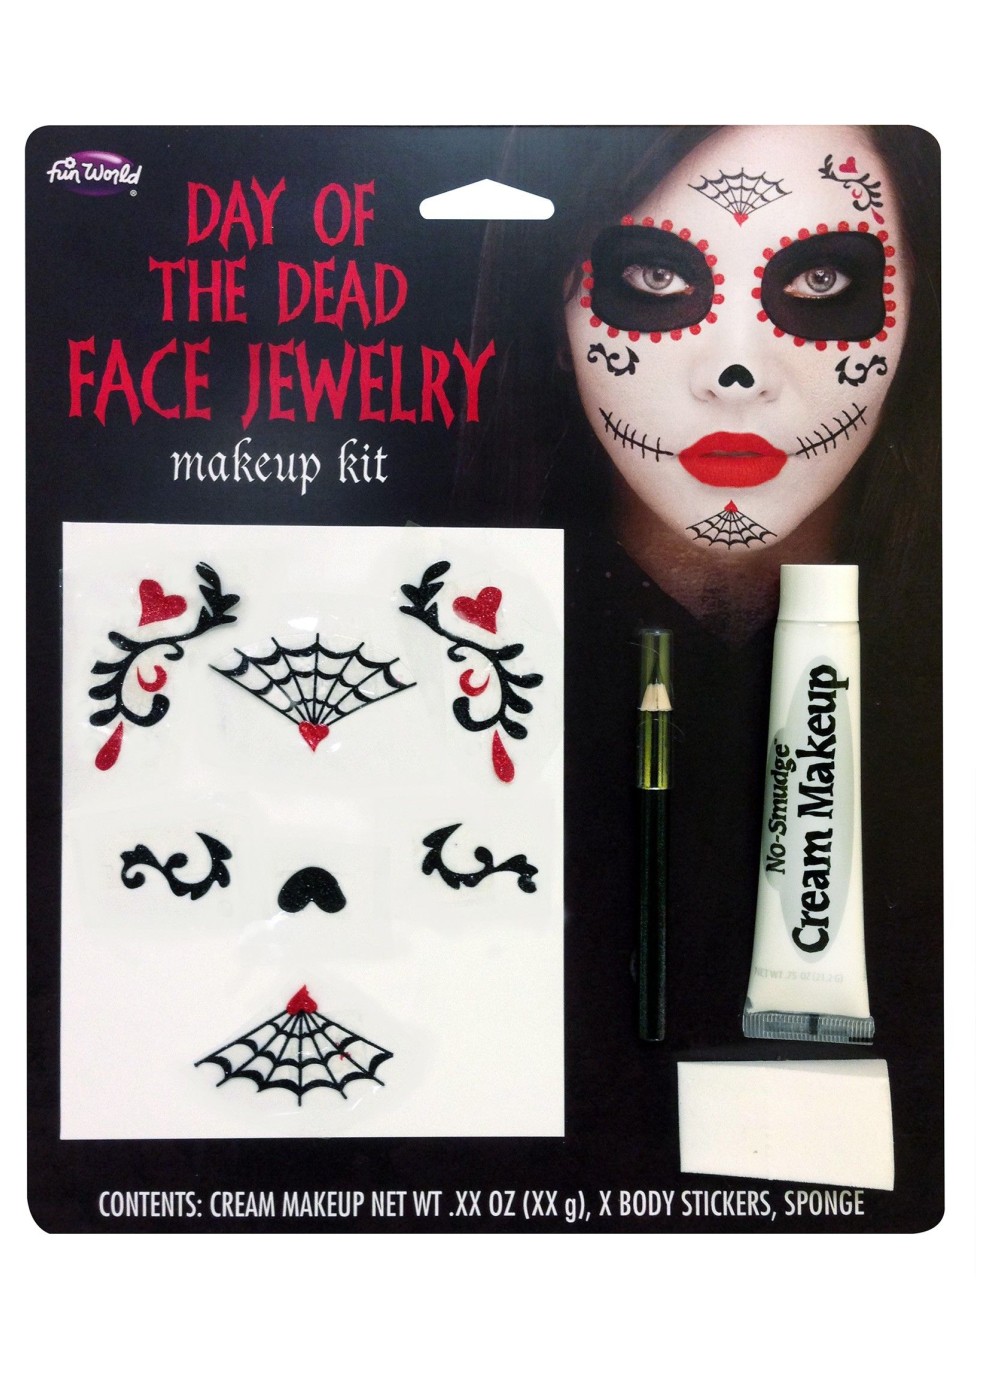 Day of the Dead Face Jewelry Makeup Kit - Accessories